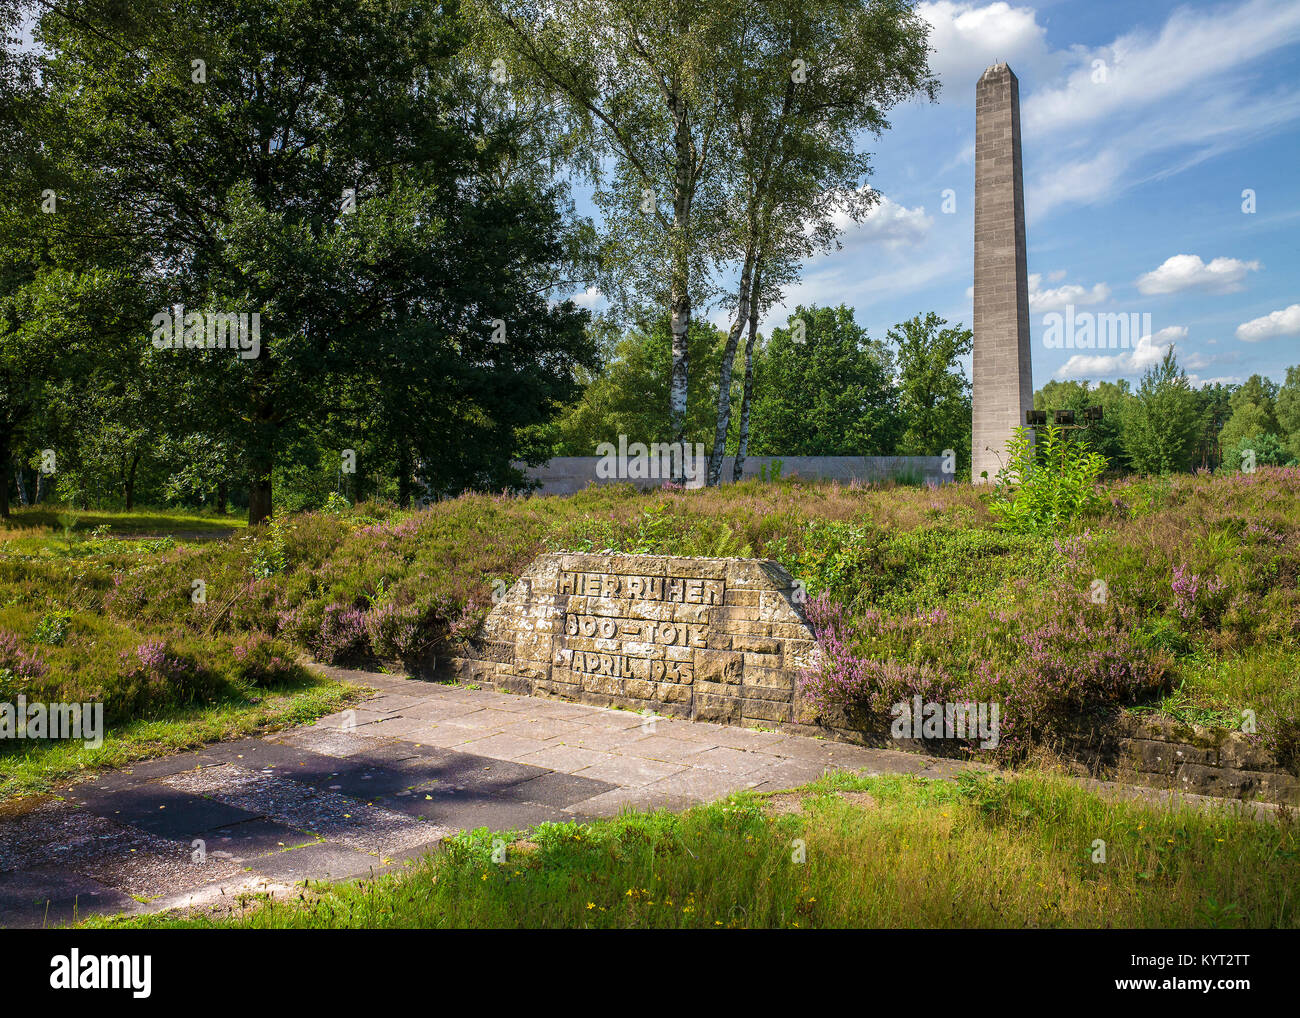 memorial wall Belsen Bergen German Nazi concentration camp 'To the memory of all those who died in this place' Stock Photo